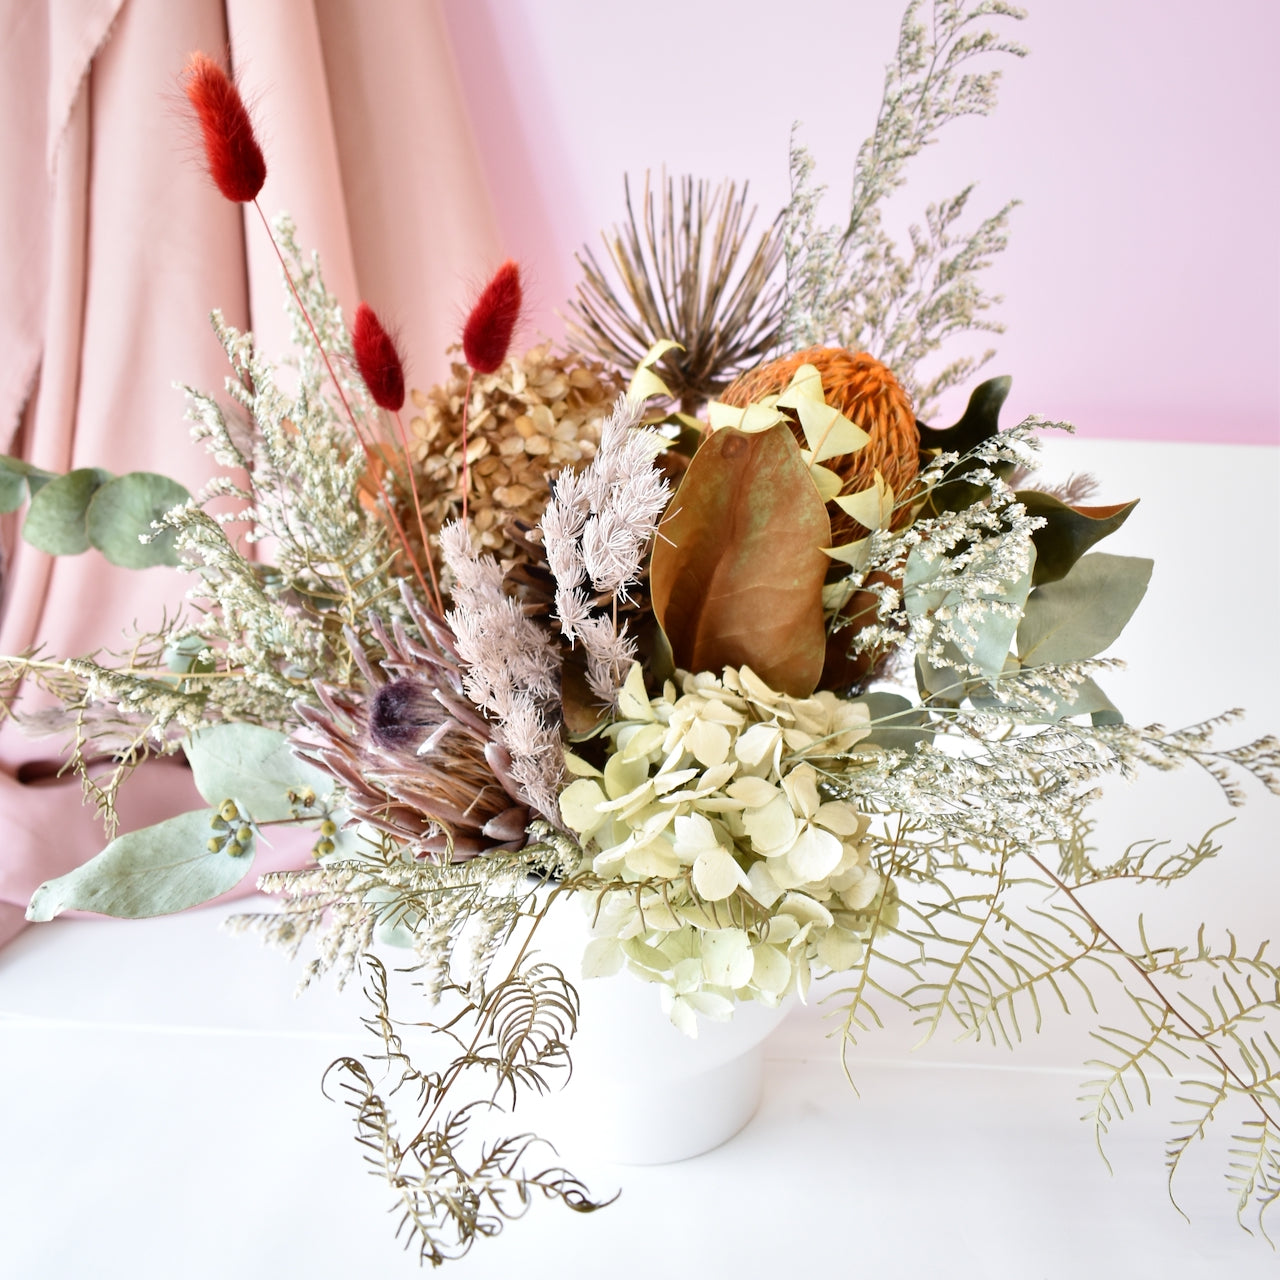 A dried flower arrangement, red bunny tails, magnolia foliage, protea, banksia, hydrangea and fern. Natural earthy colours.